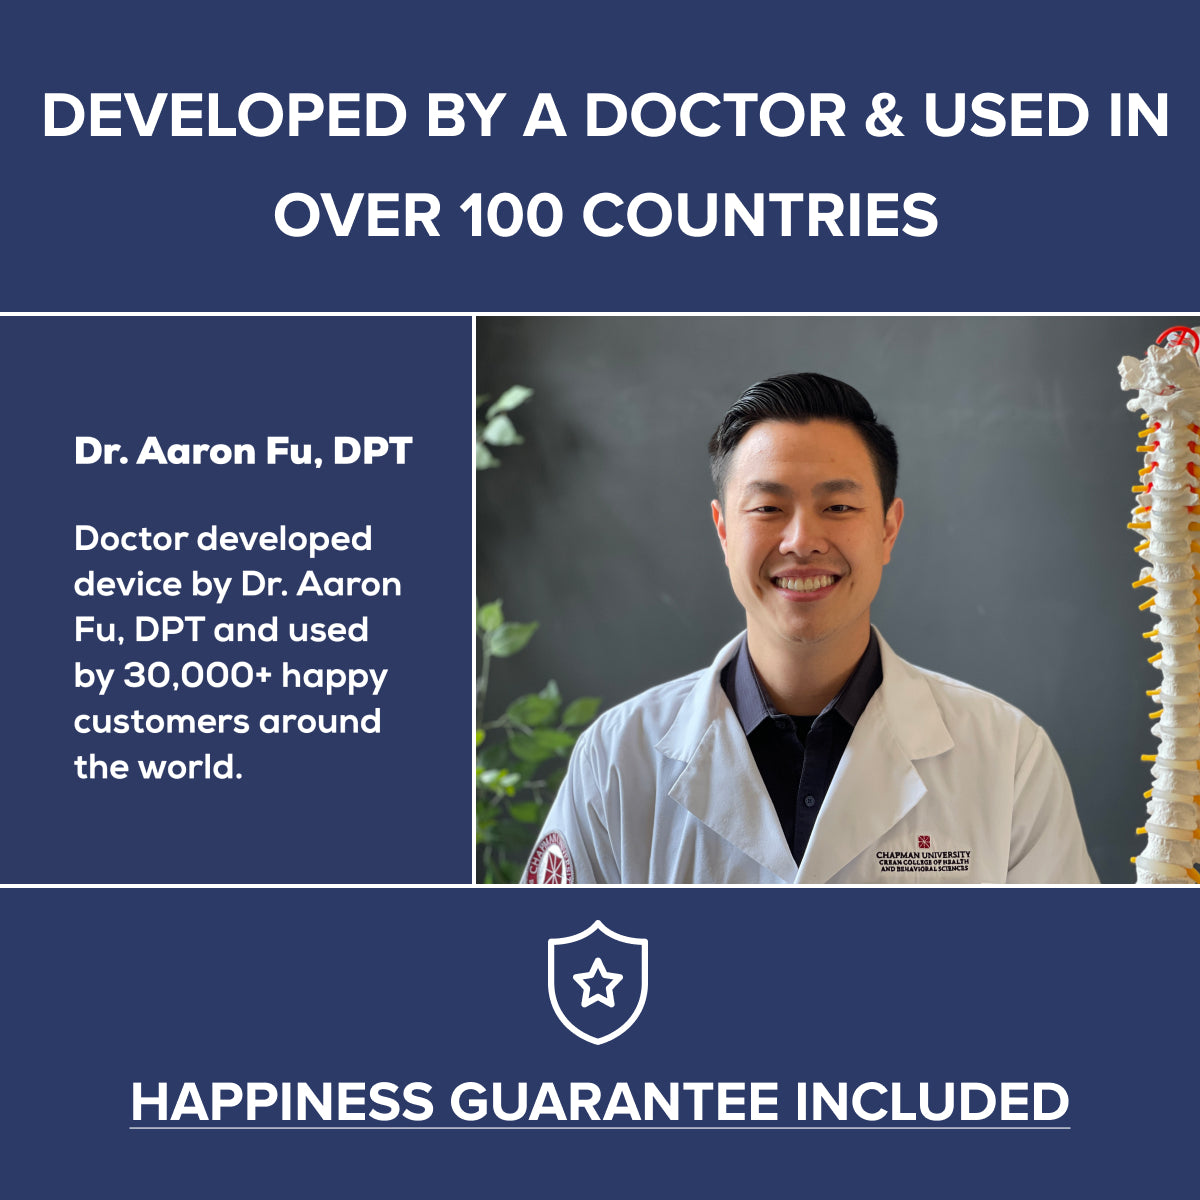 Dr. Aaron Fu, creator of the Trigger Point Rocker, smiling confidently knowing that 30,000+ happy customers in over 100 countries are smiling too.